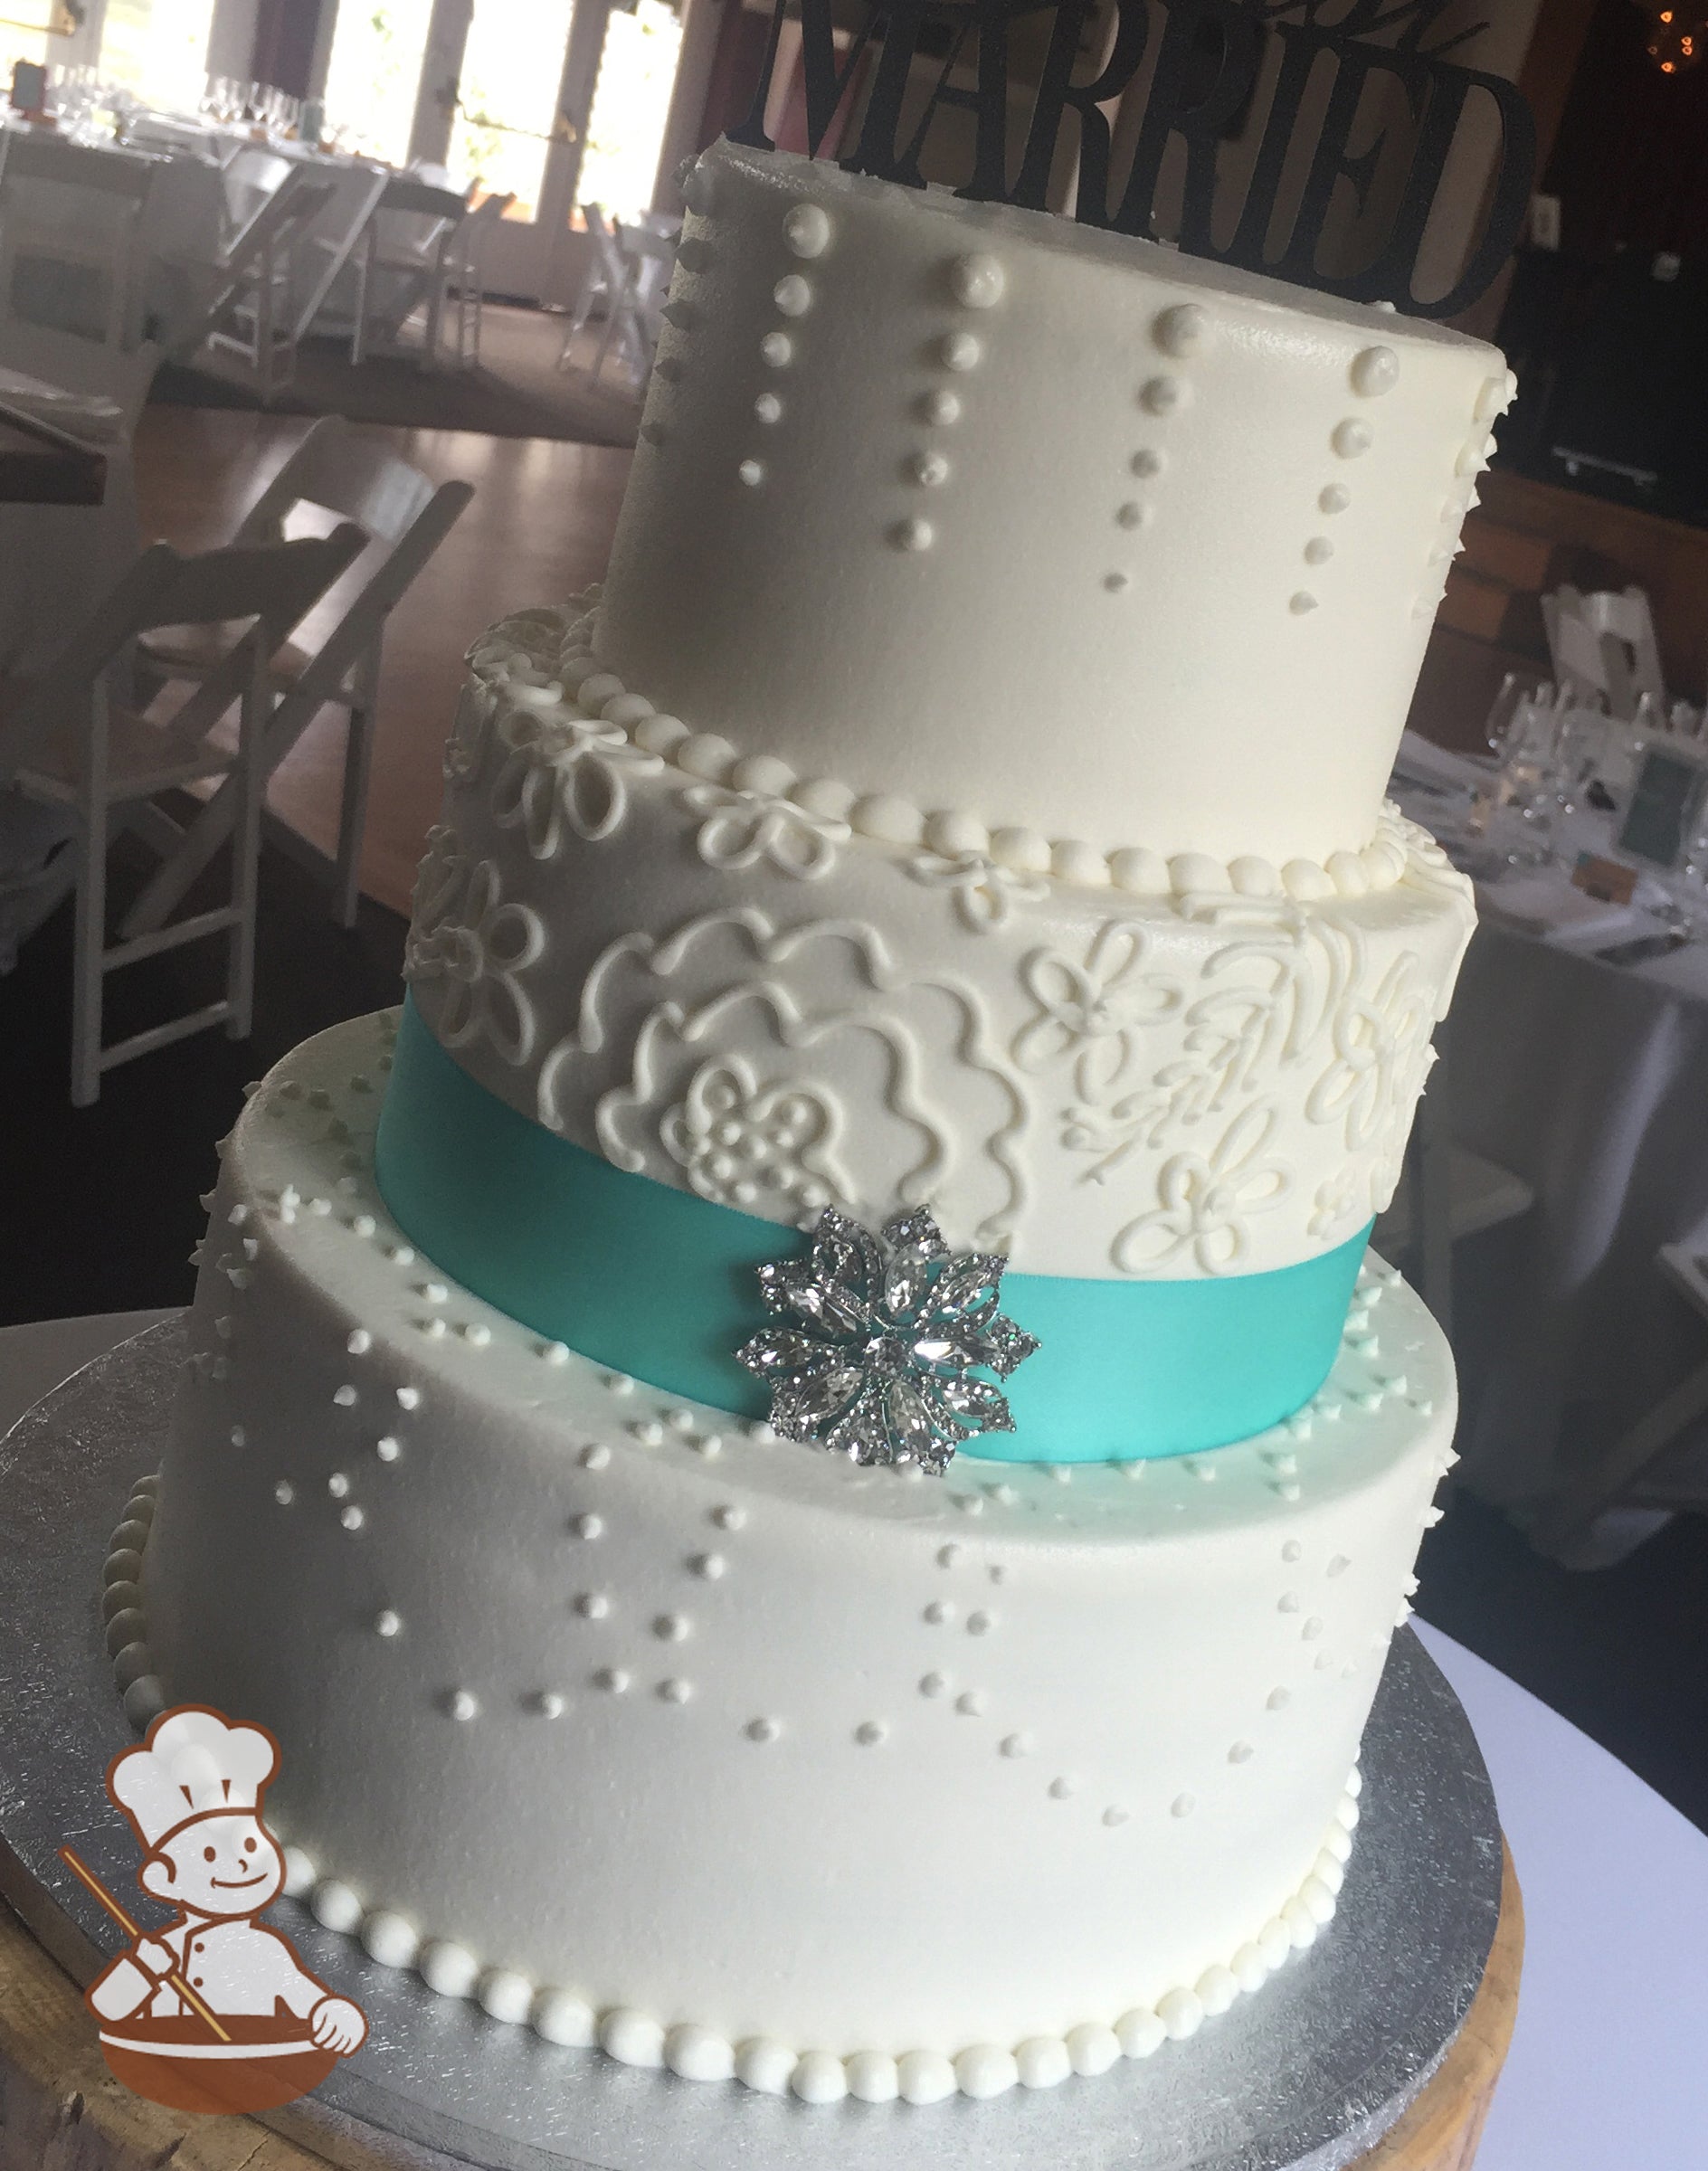 3-tier cake with smooth white icing and decorated with different white buttercream piping's and a turquoise ribbon with a silver brooch.